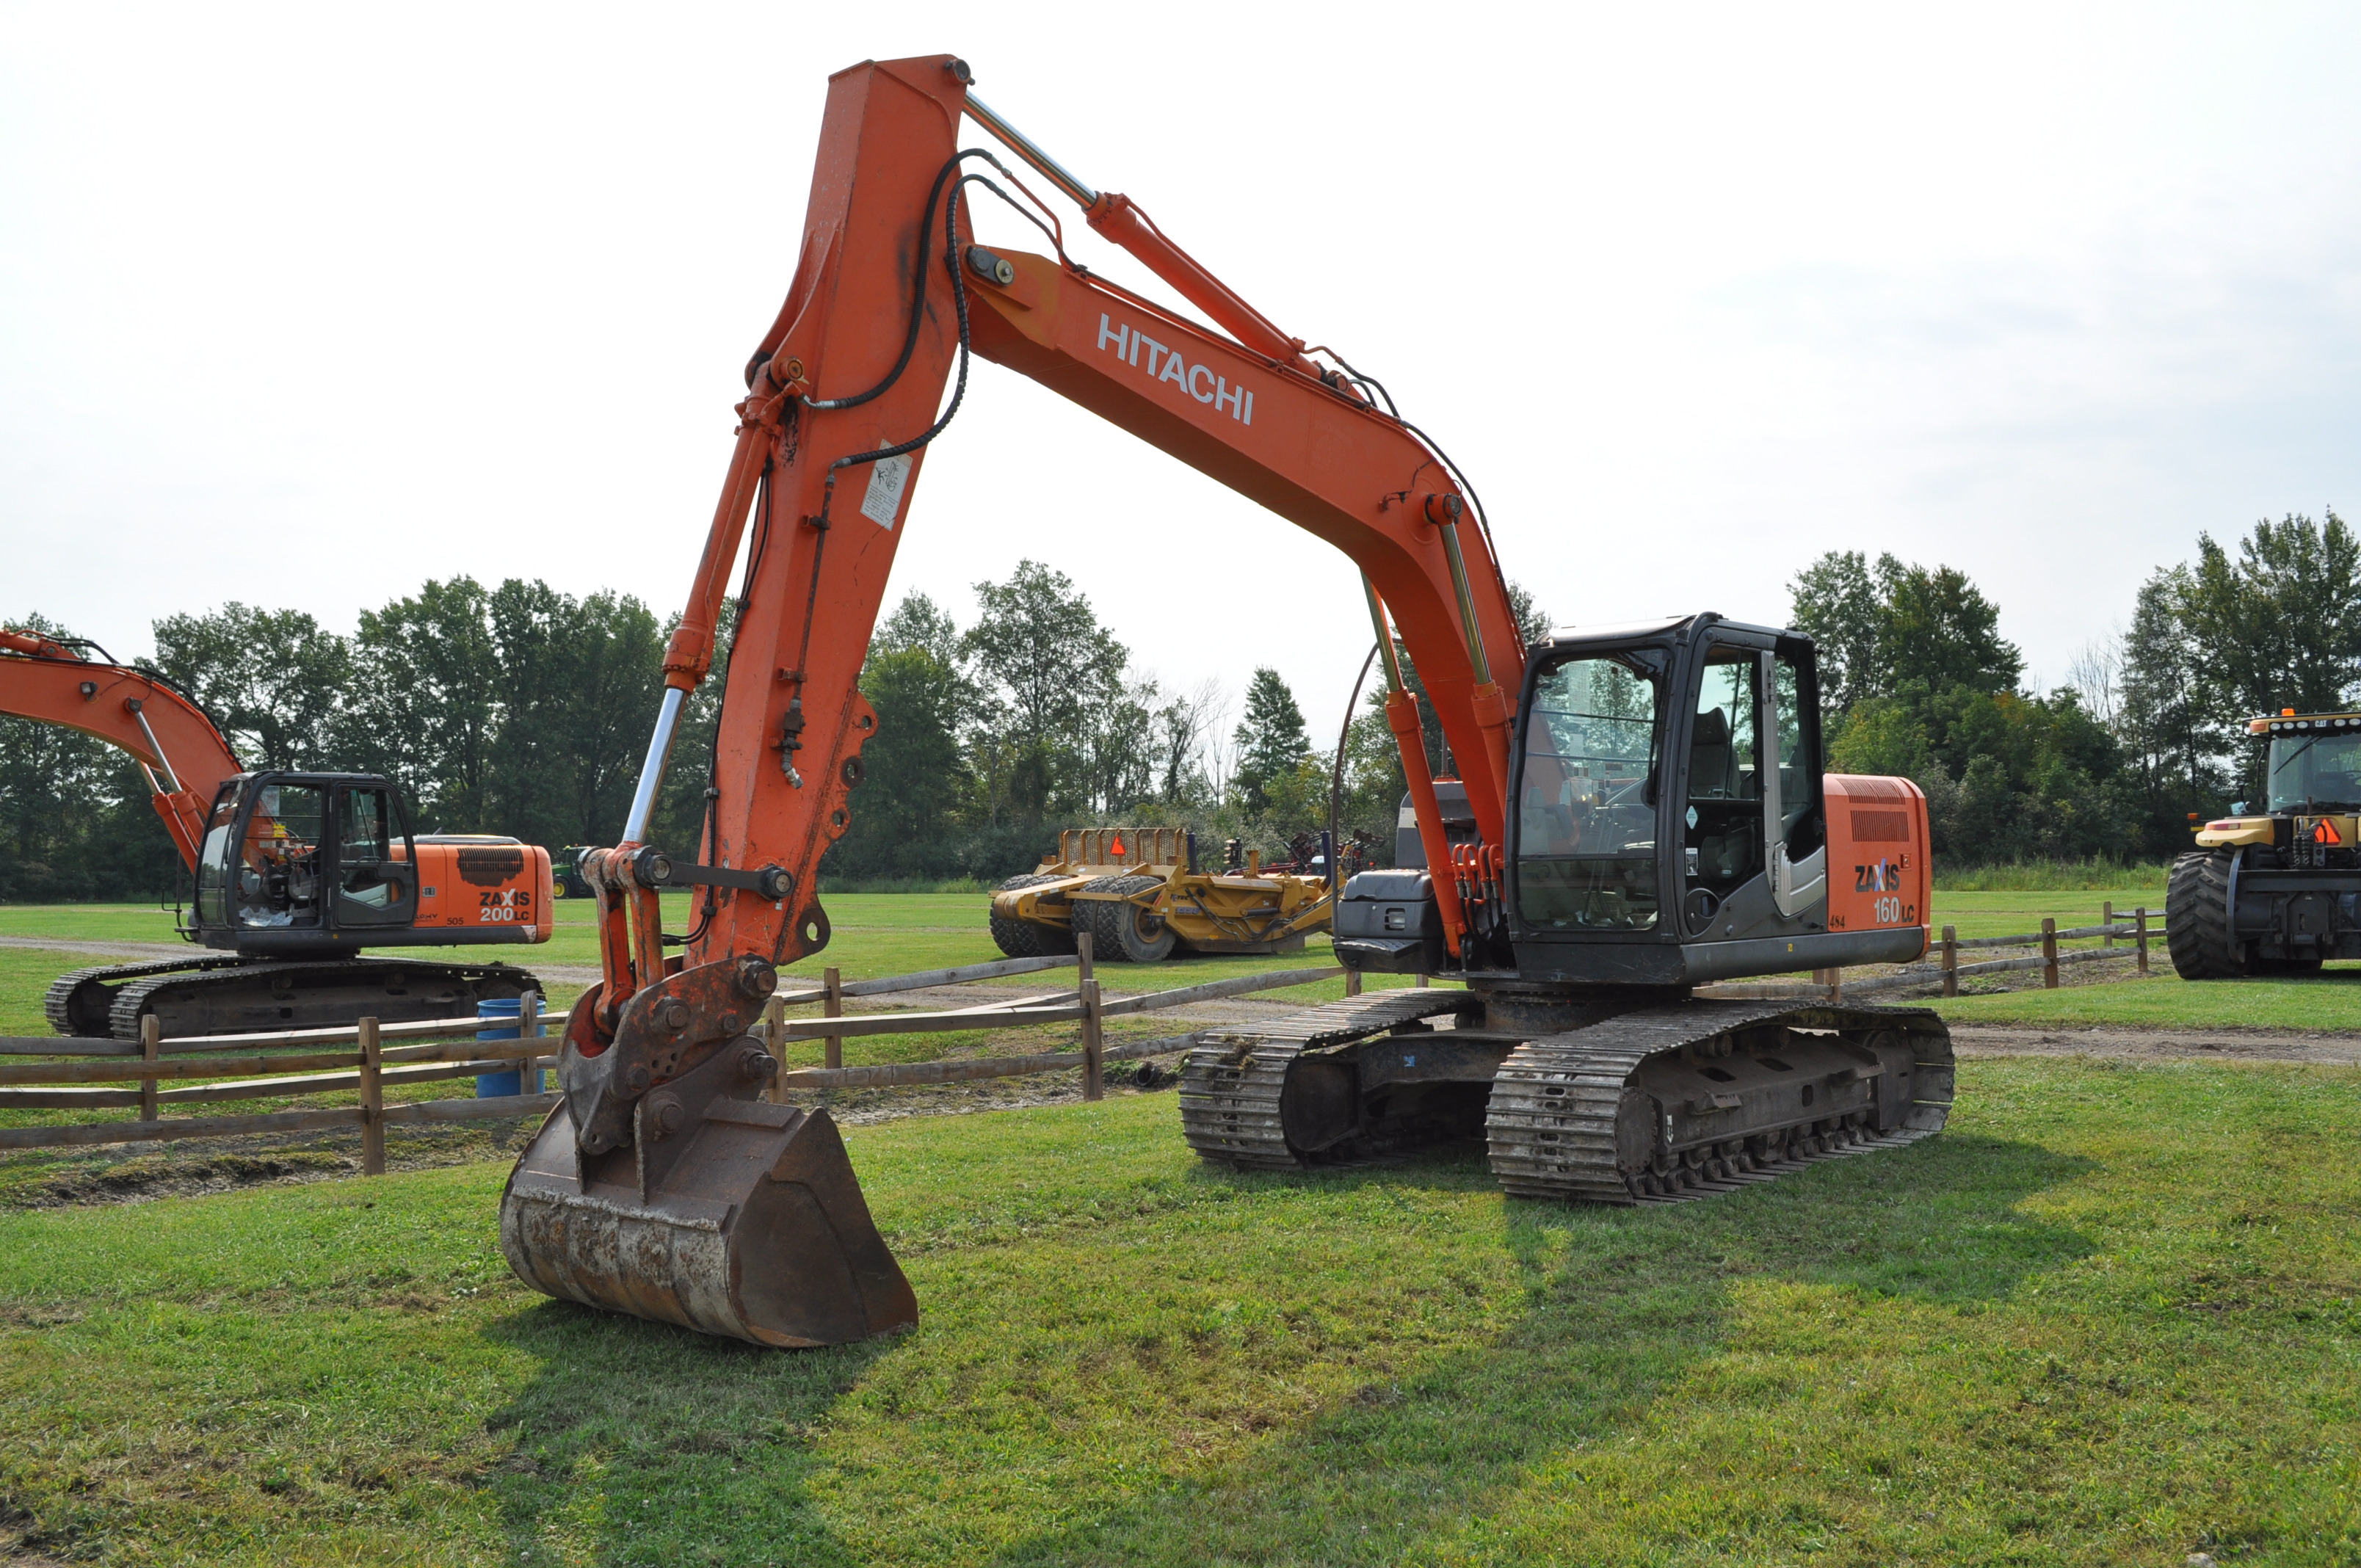 Hitachi ZX 160 LC-3 excavator, 28” steel pads, C/H/A, 5' smooth 